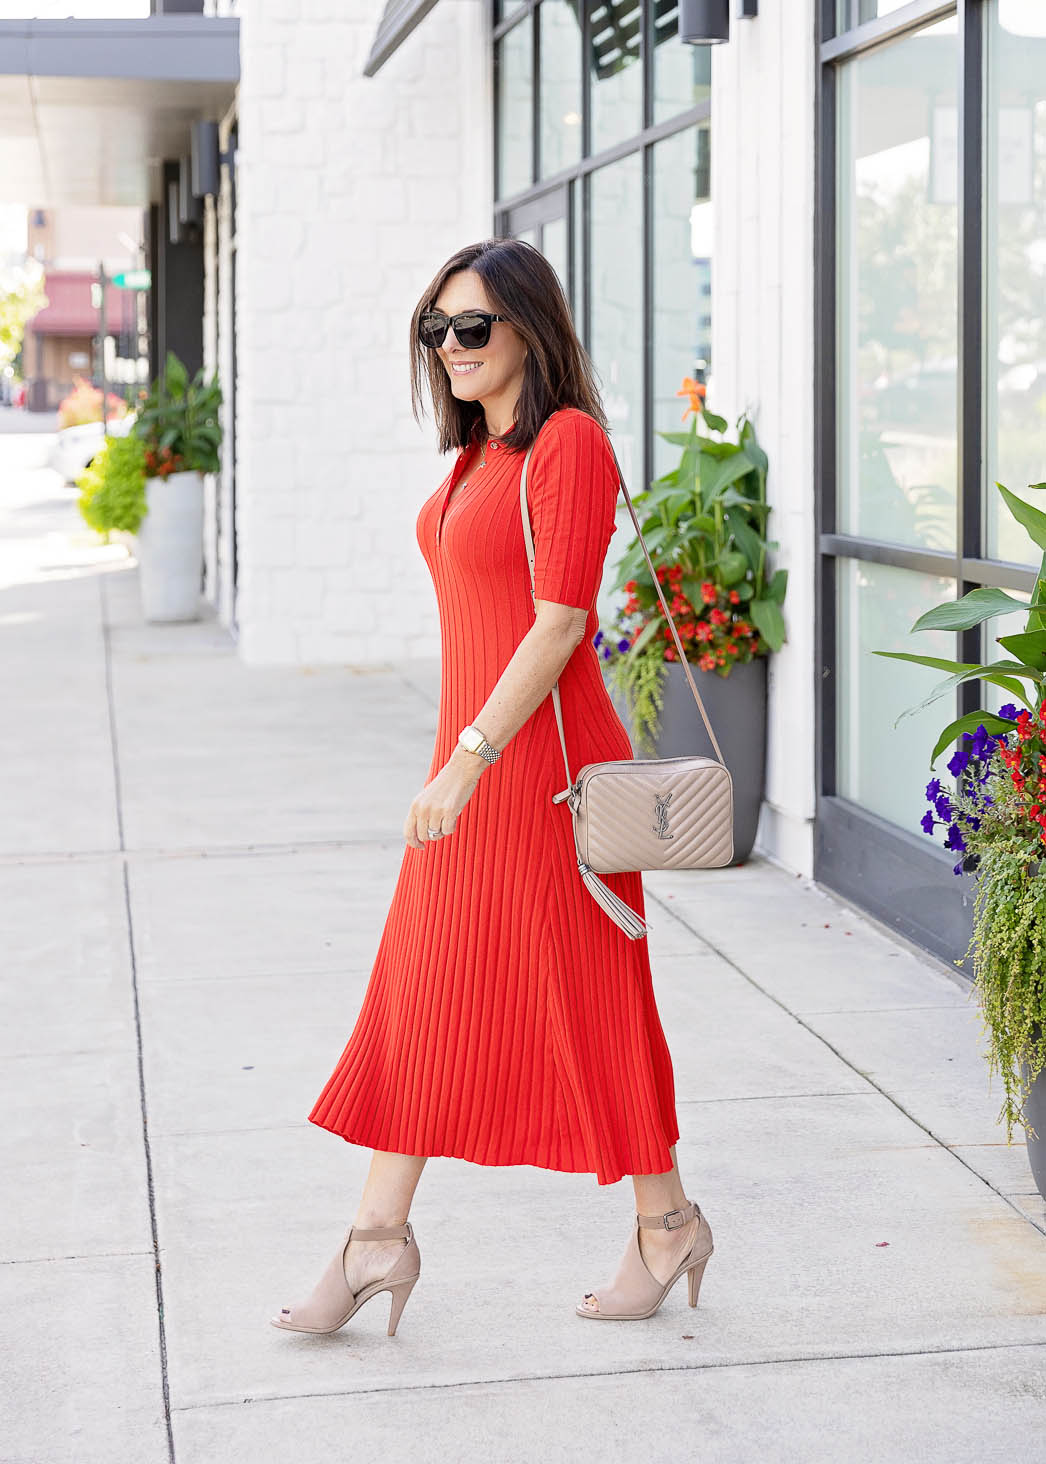 Fall Color Trend to Try: Red